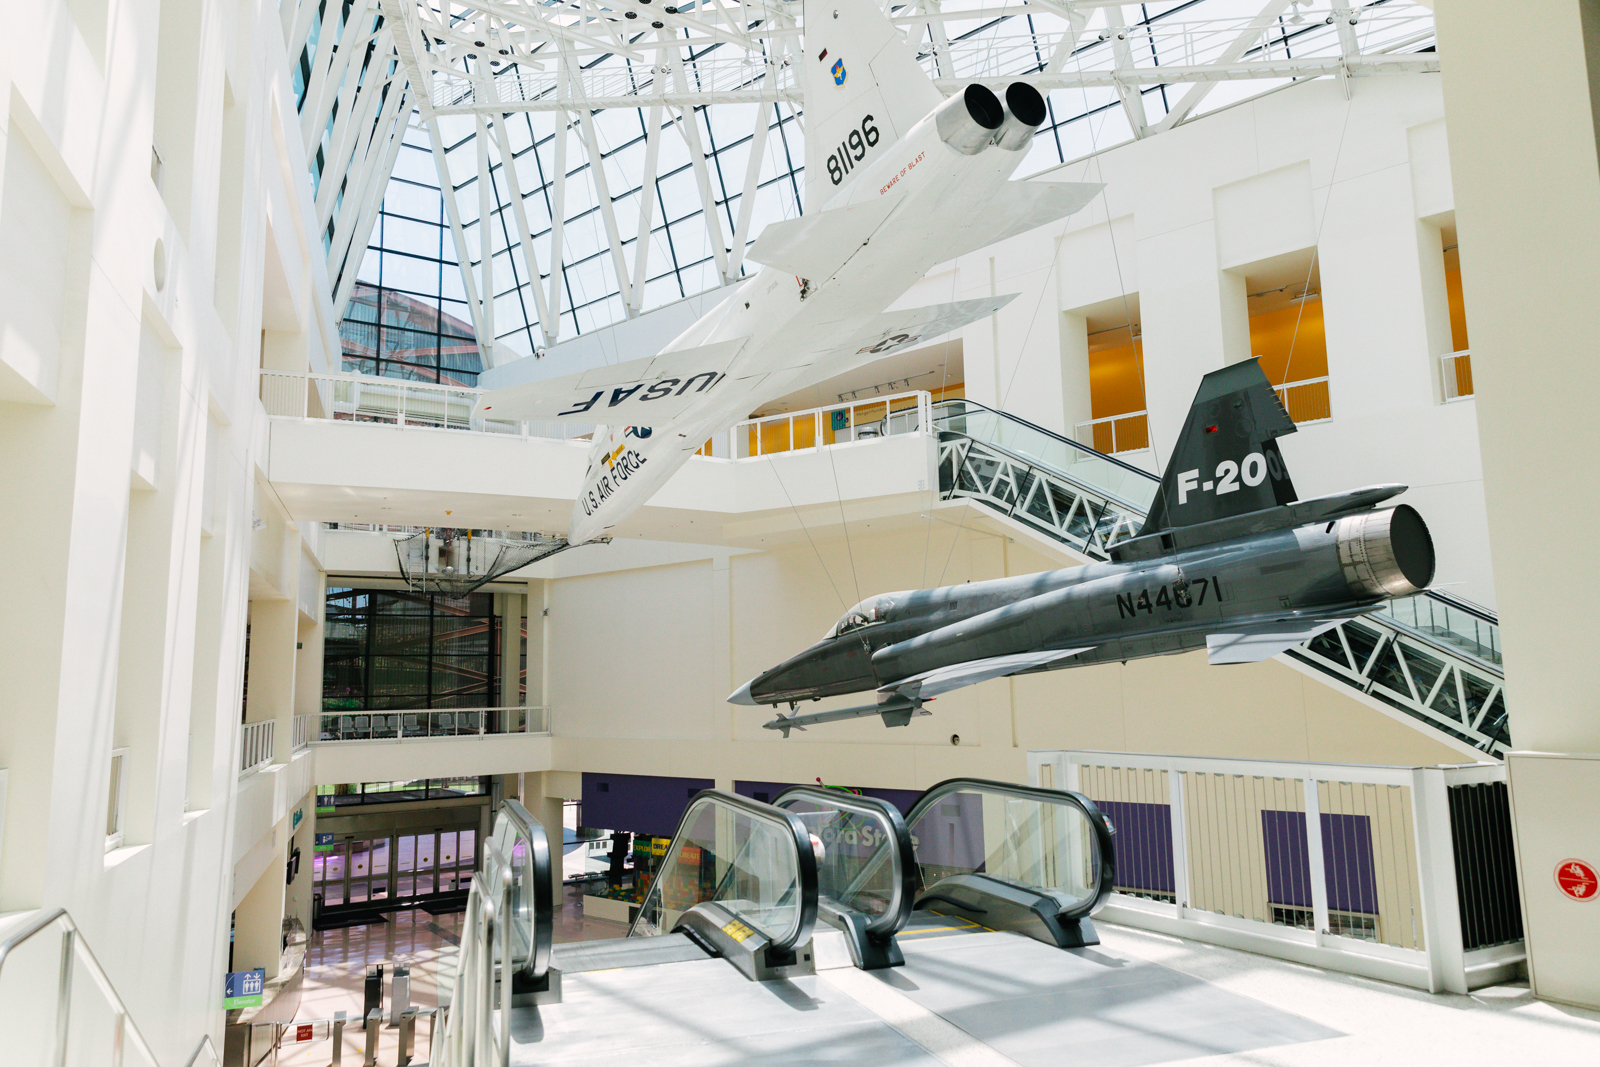 View of the F-20 Tigershark and Northrop T-38 Talon aircrafts from 2nd floor Disney Science Court